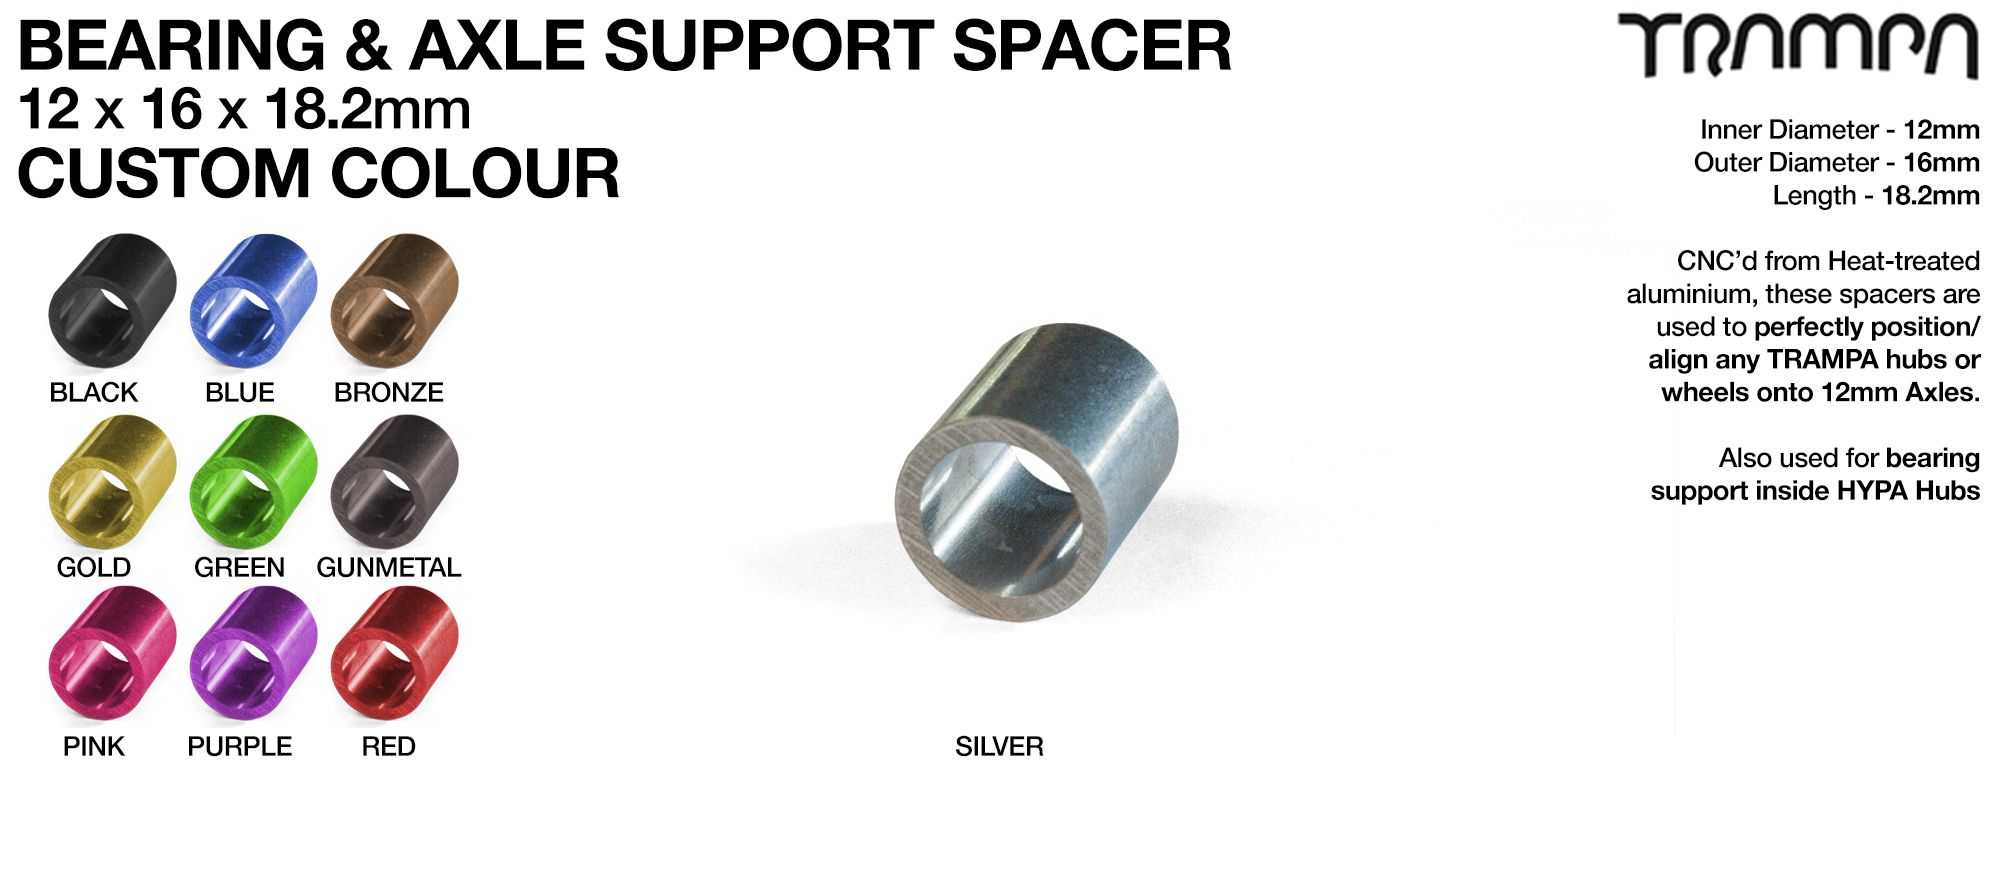 Wheel support spacer for all TRAMPA Wheels on 12mm ATB Axles - 12mm x 16mm x 18.2mm - No Anodise